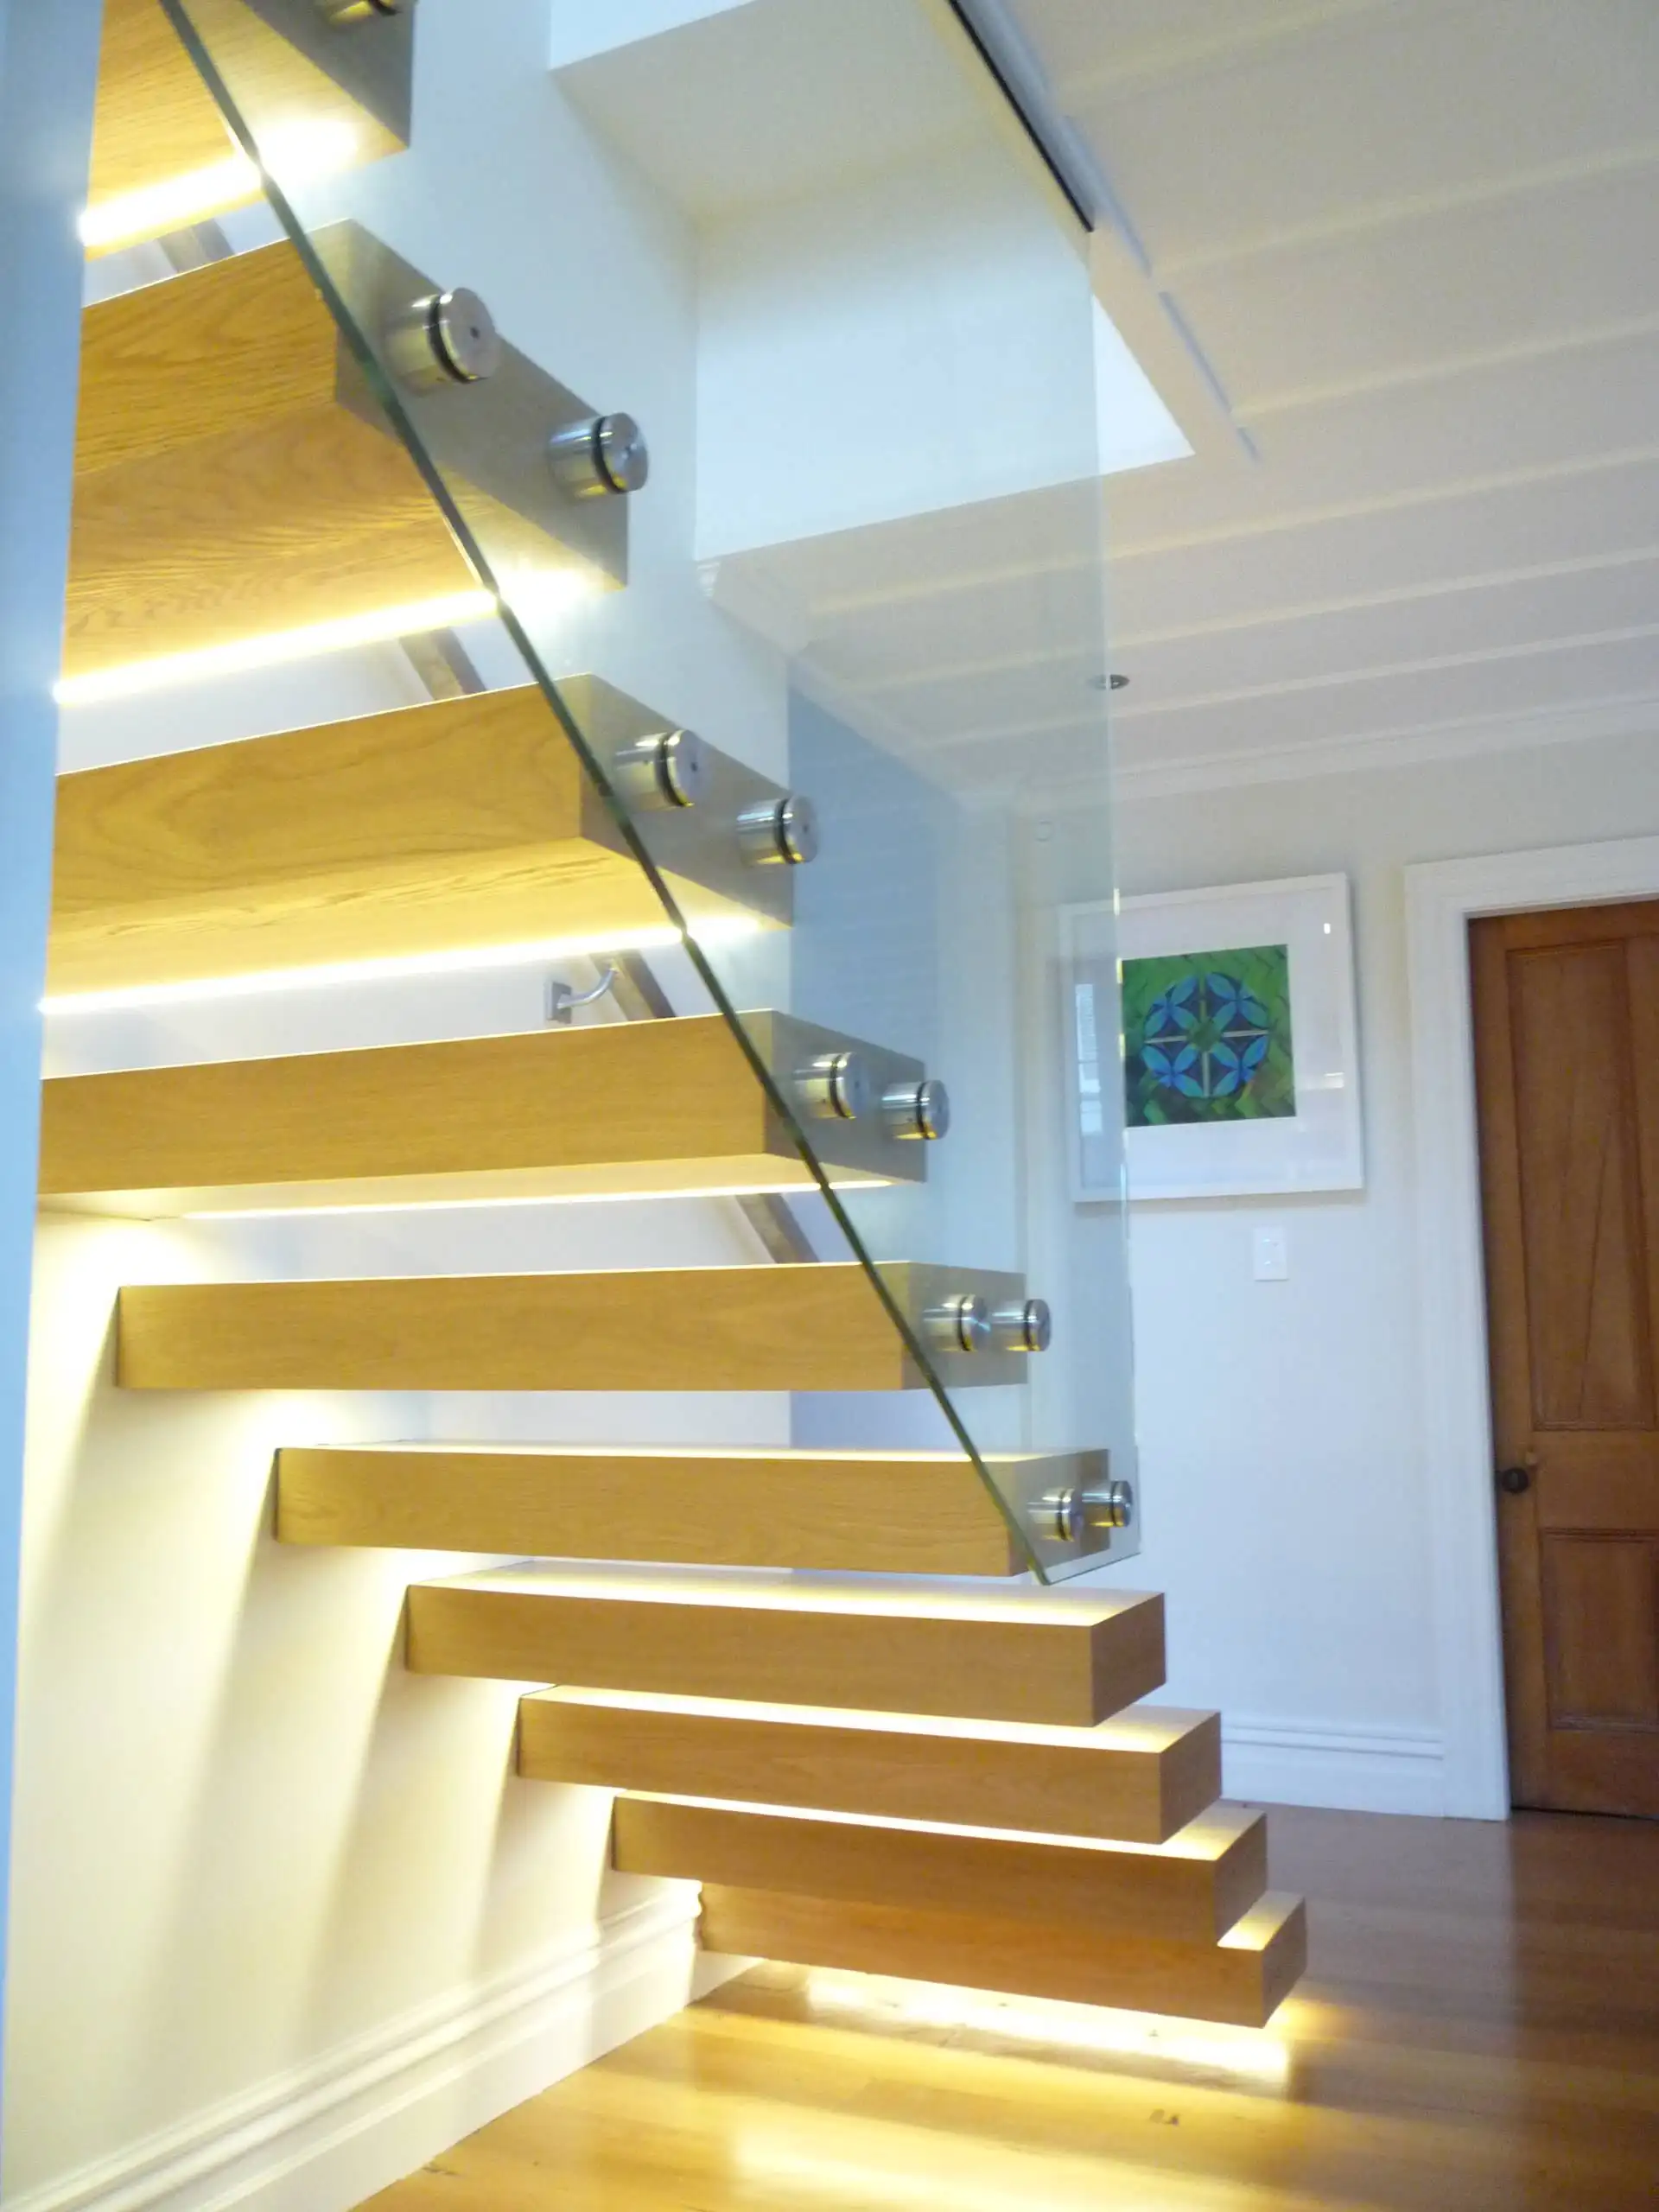 North American Construction Code Modern Stair Floating Straight Stairs Interior Staircase With Wood Tread And Glass Railing